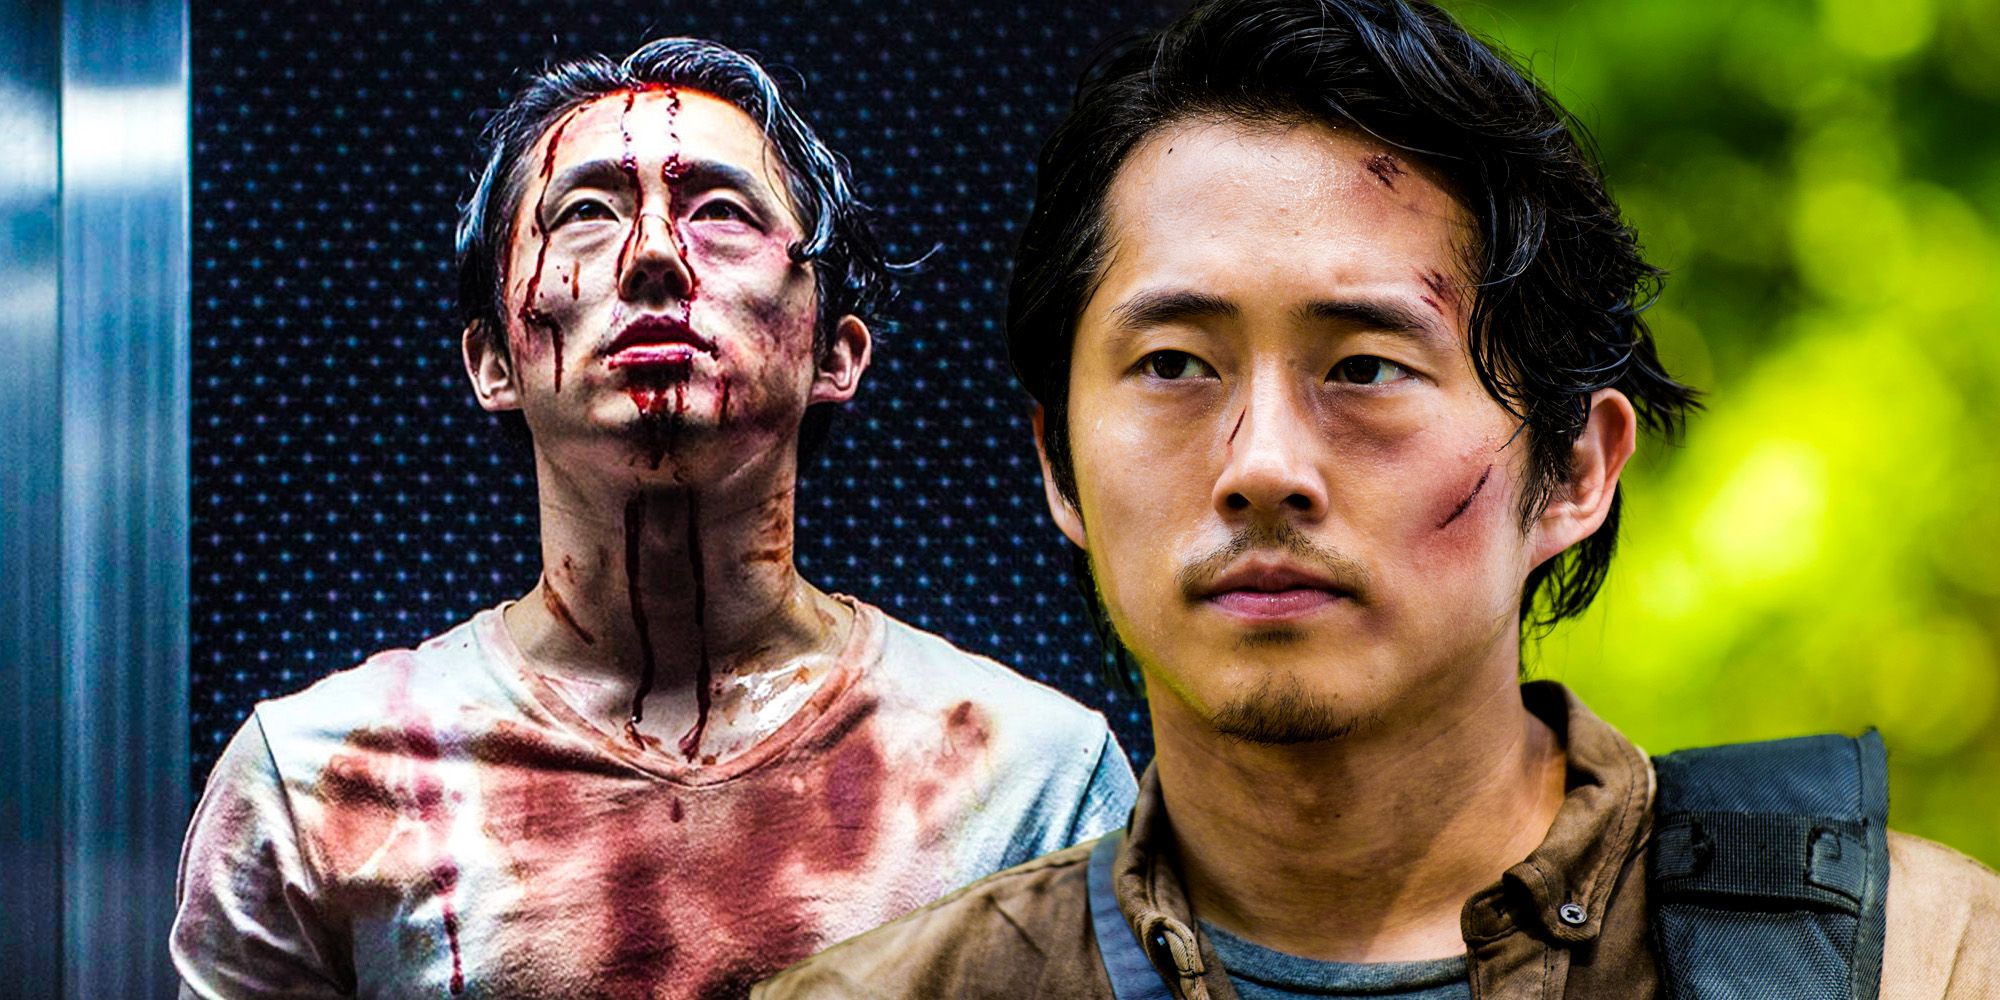 Every Steven Yeun Movie Ranked Worst To Best.